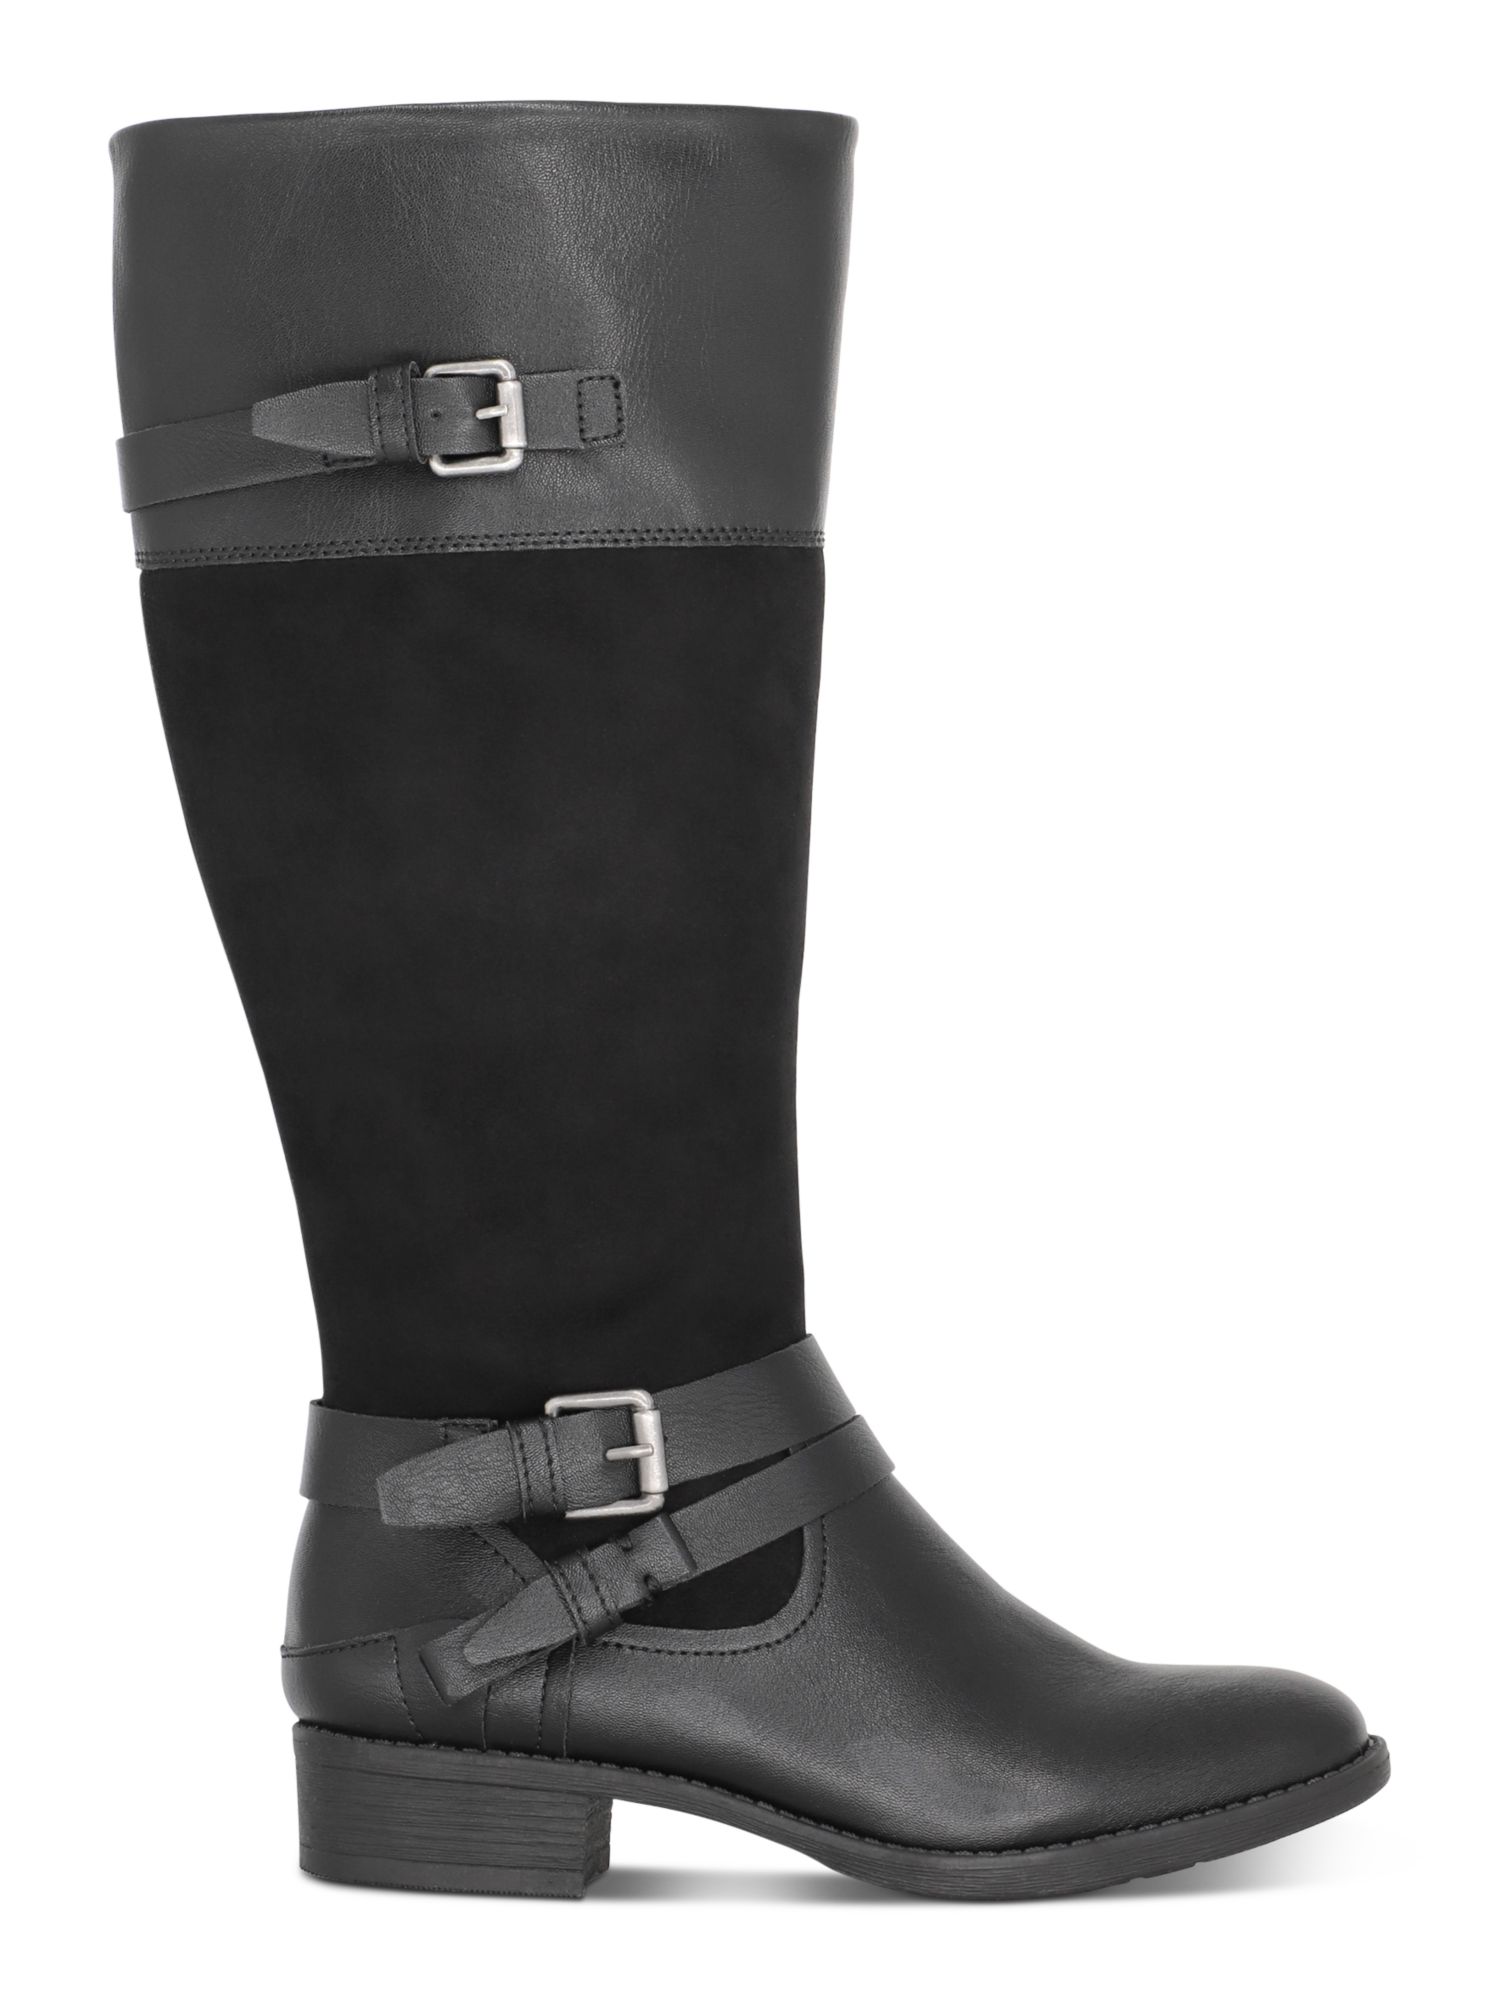 STYLE & COMPANY Womens Black Buckle Accent Padded Ashliie Round Toe Block Heel Zip-Up Boots Shoes 7 M - image 1 of 4